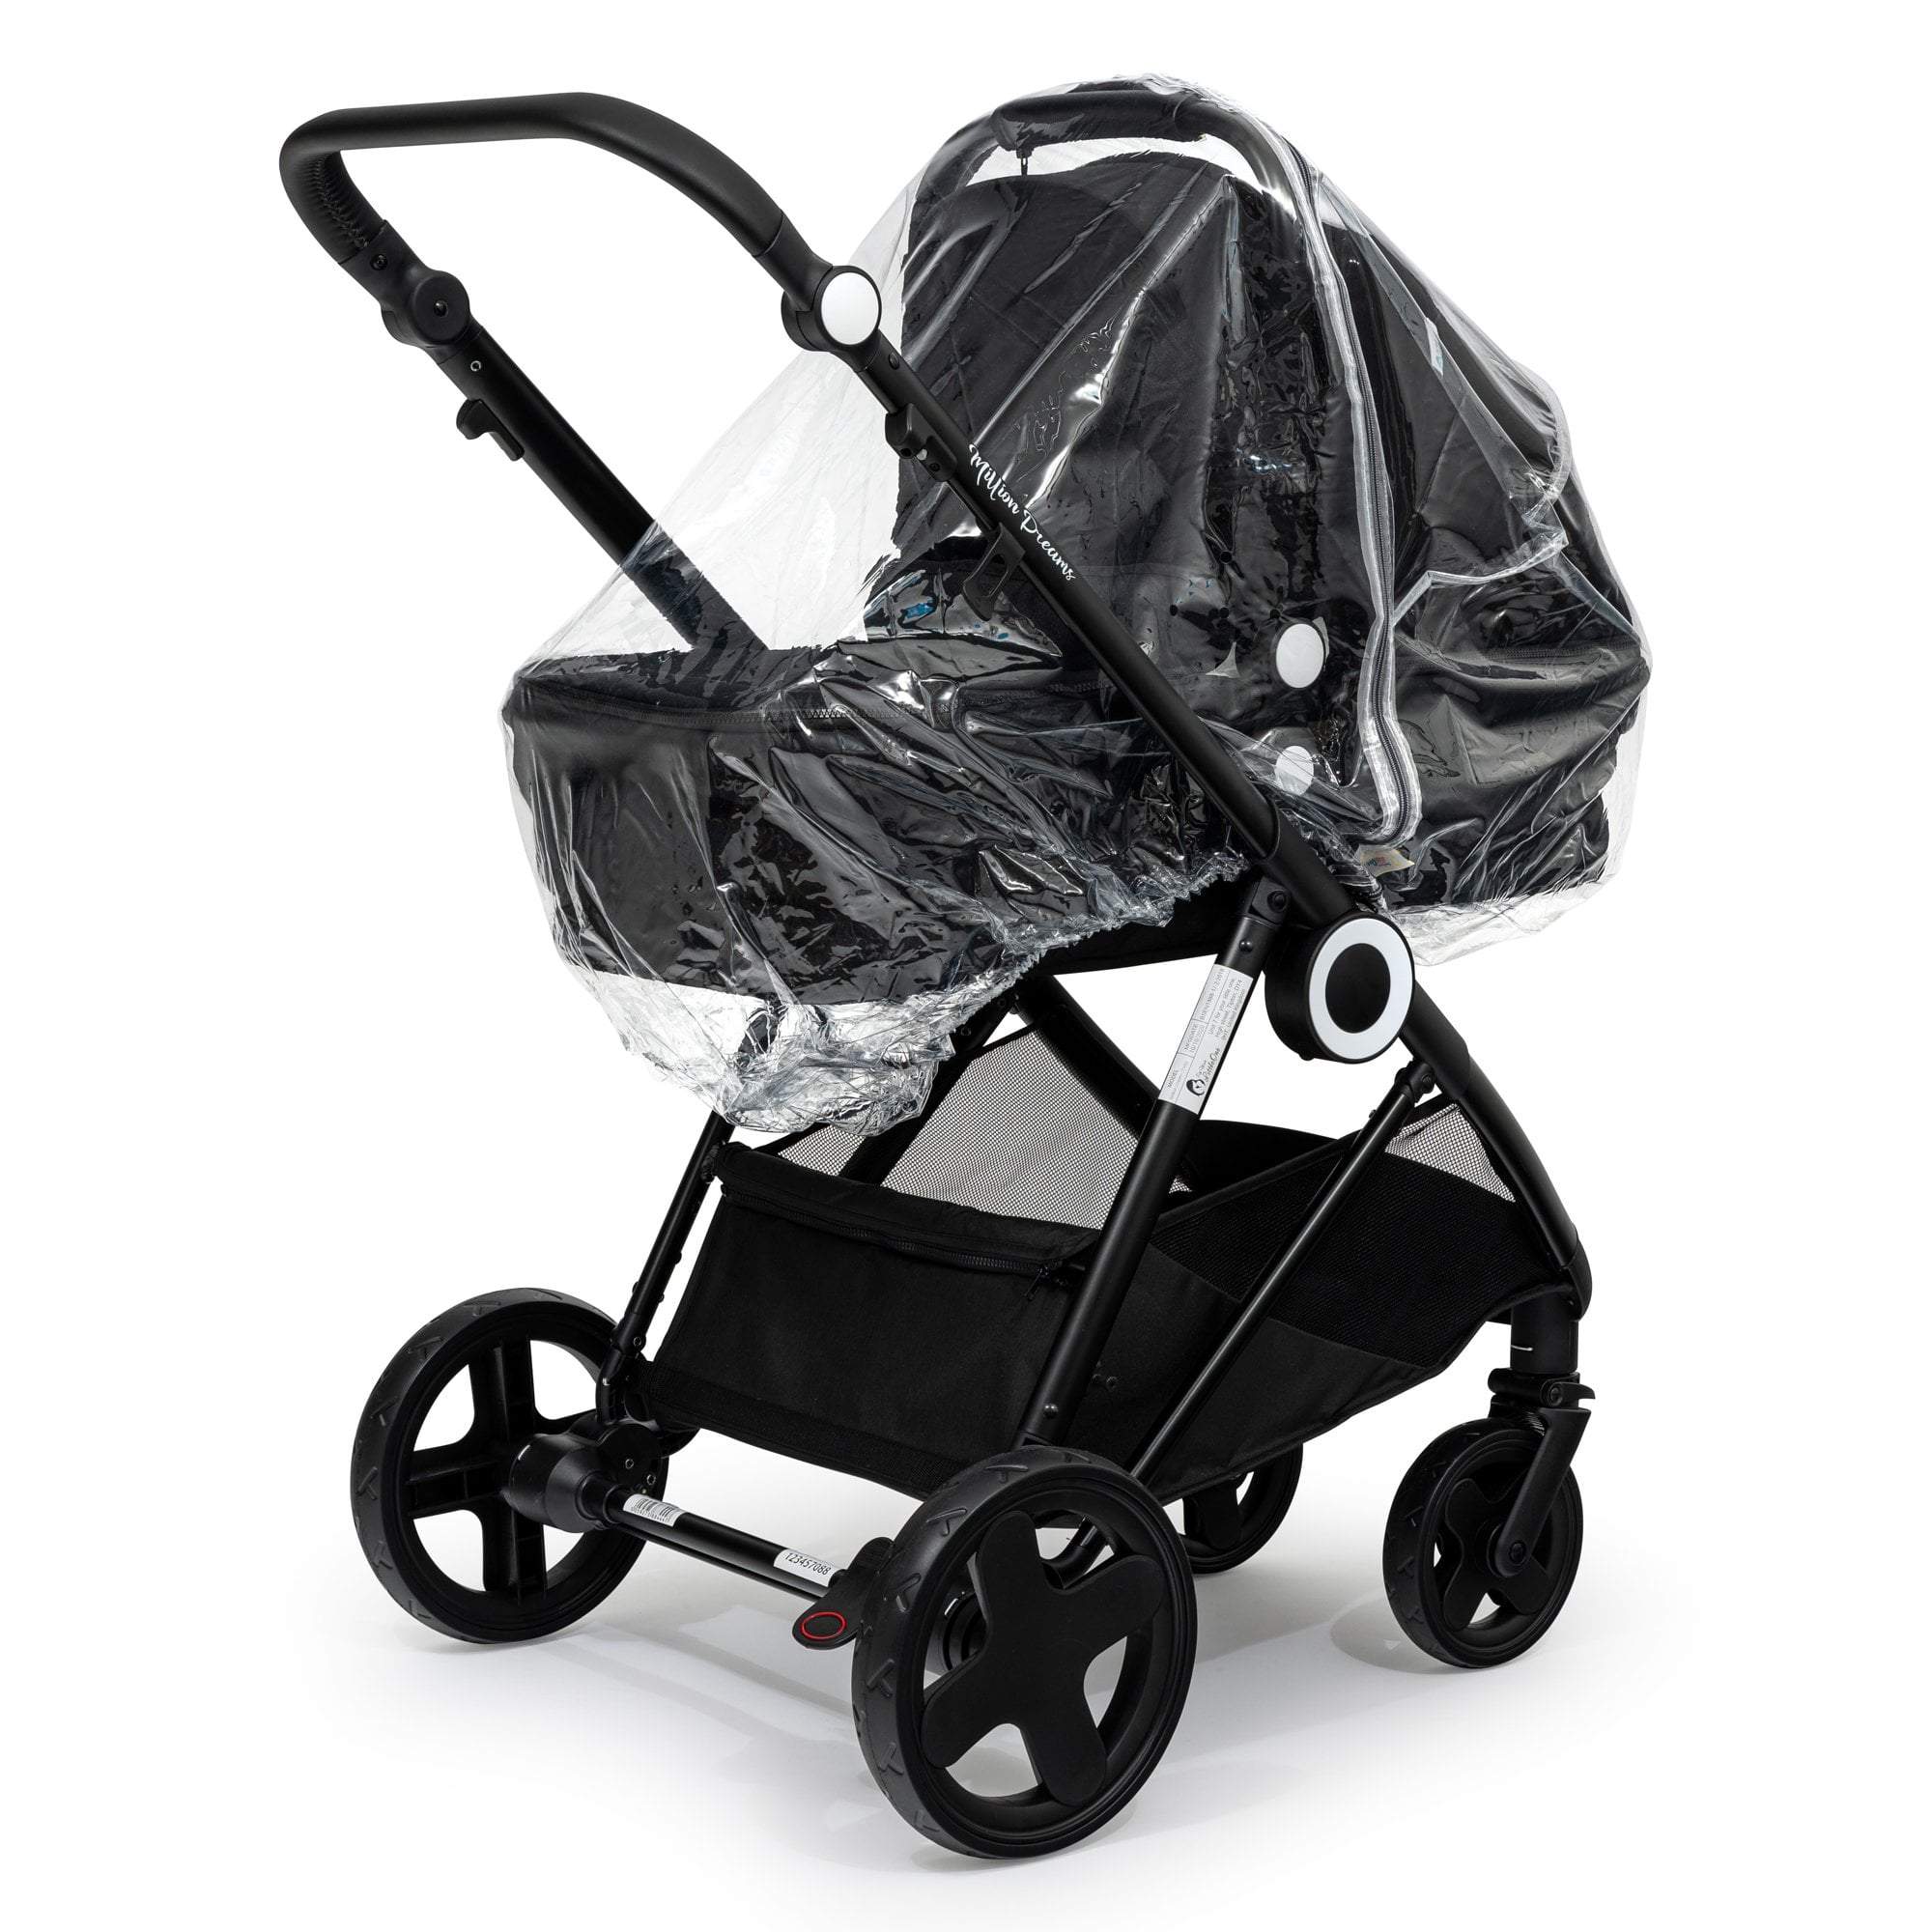 Carrycot Raincover Compatible With Hauck - Fits All Models - For Your Little One